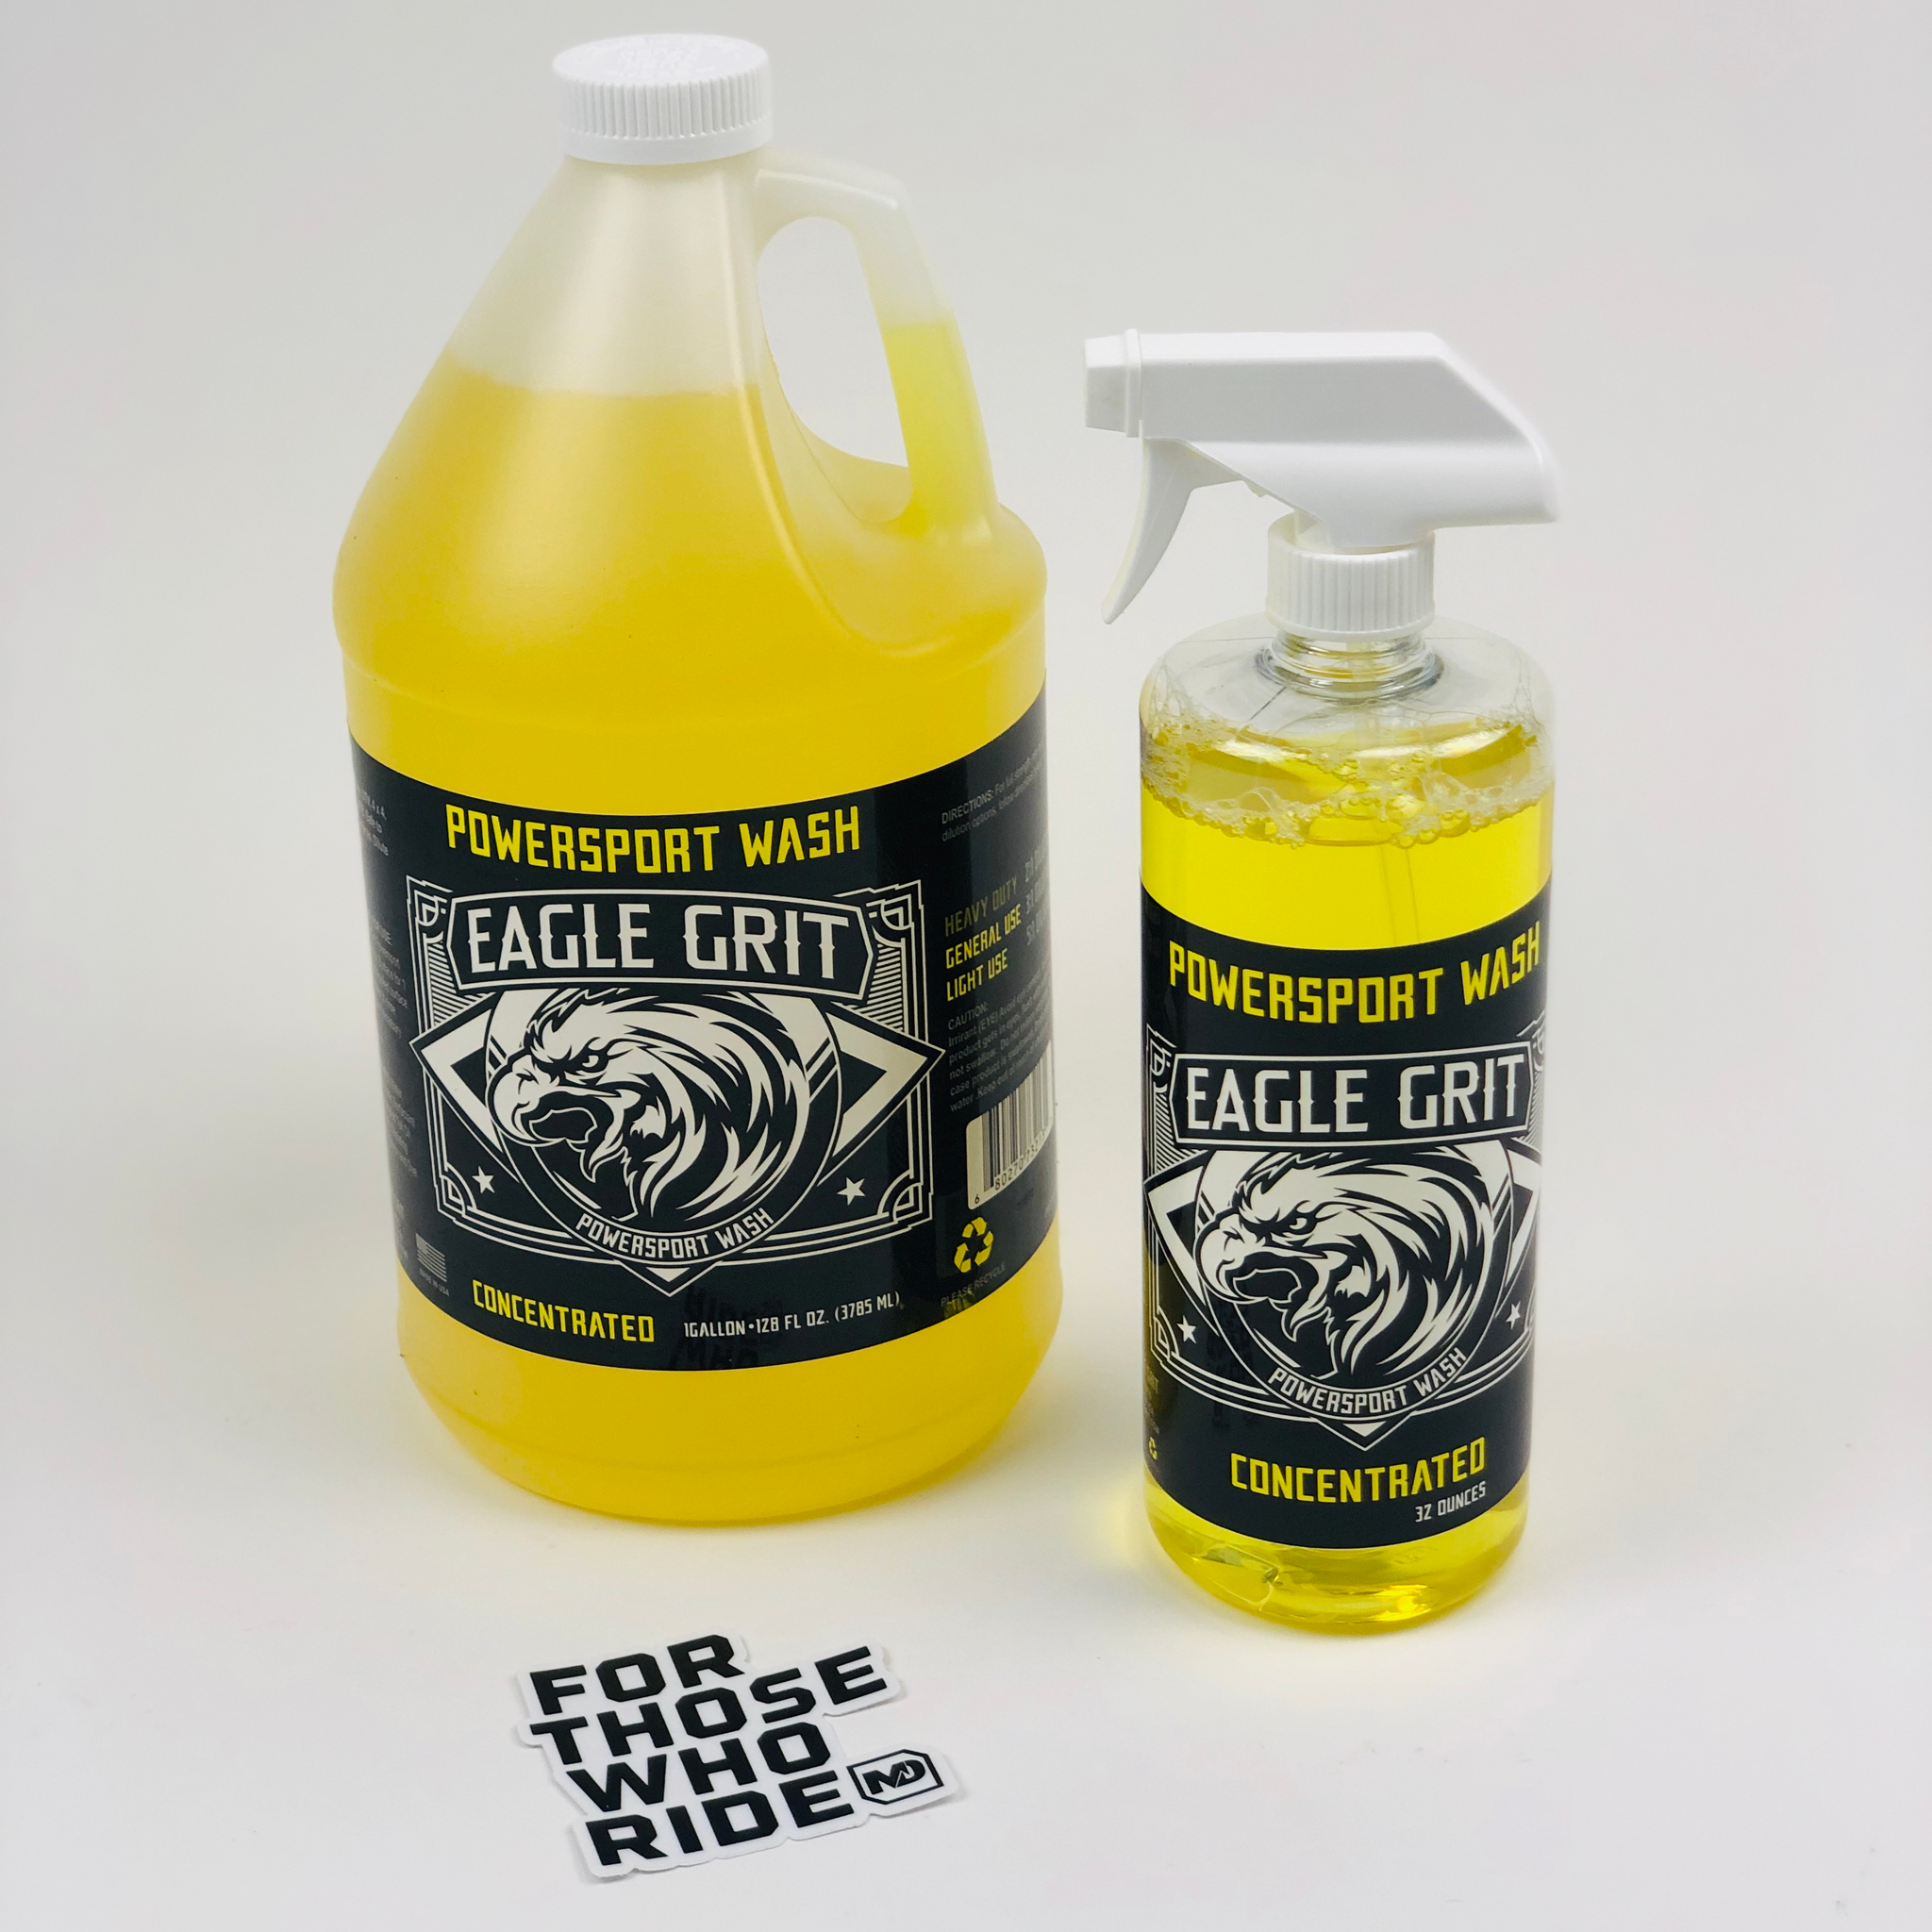 Eagle Grit Powersport Wash is the dirt bike cleaning product we've always needed...